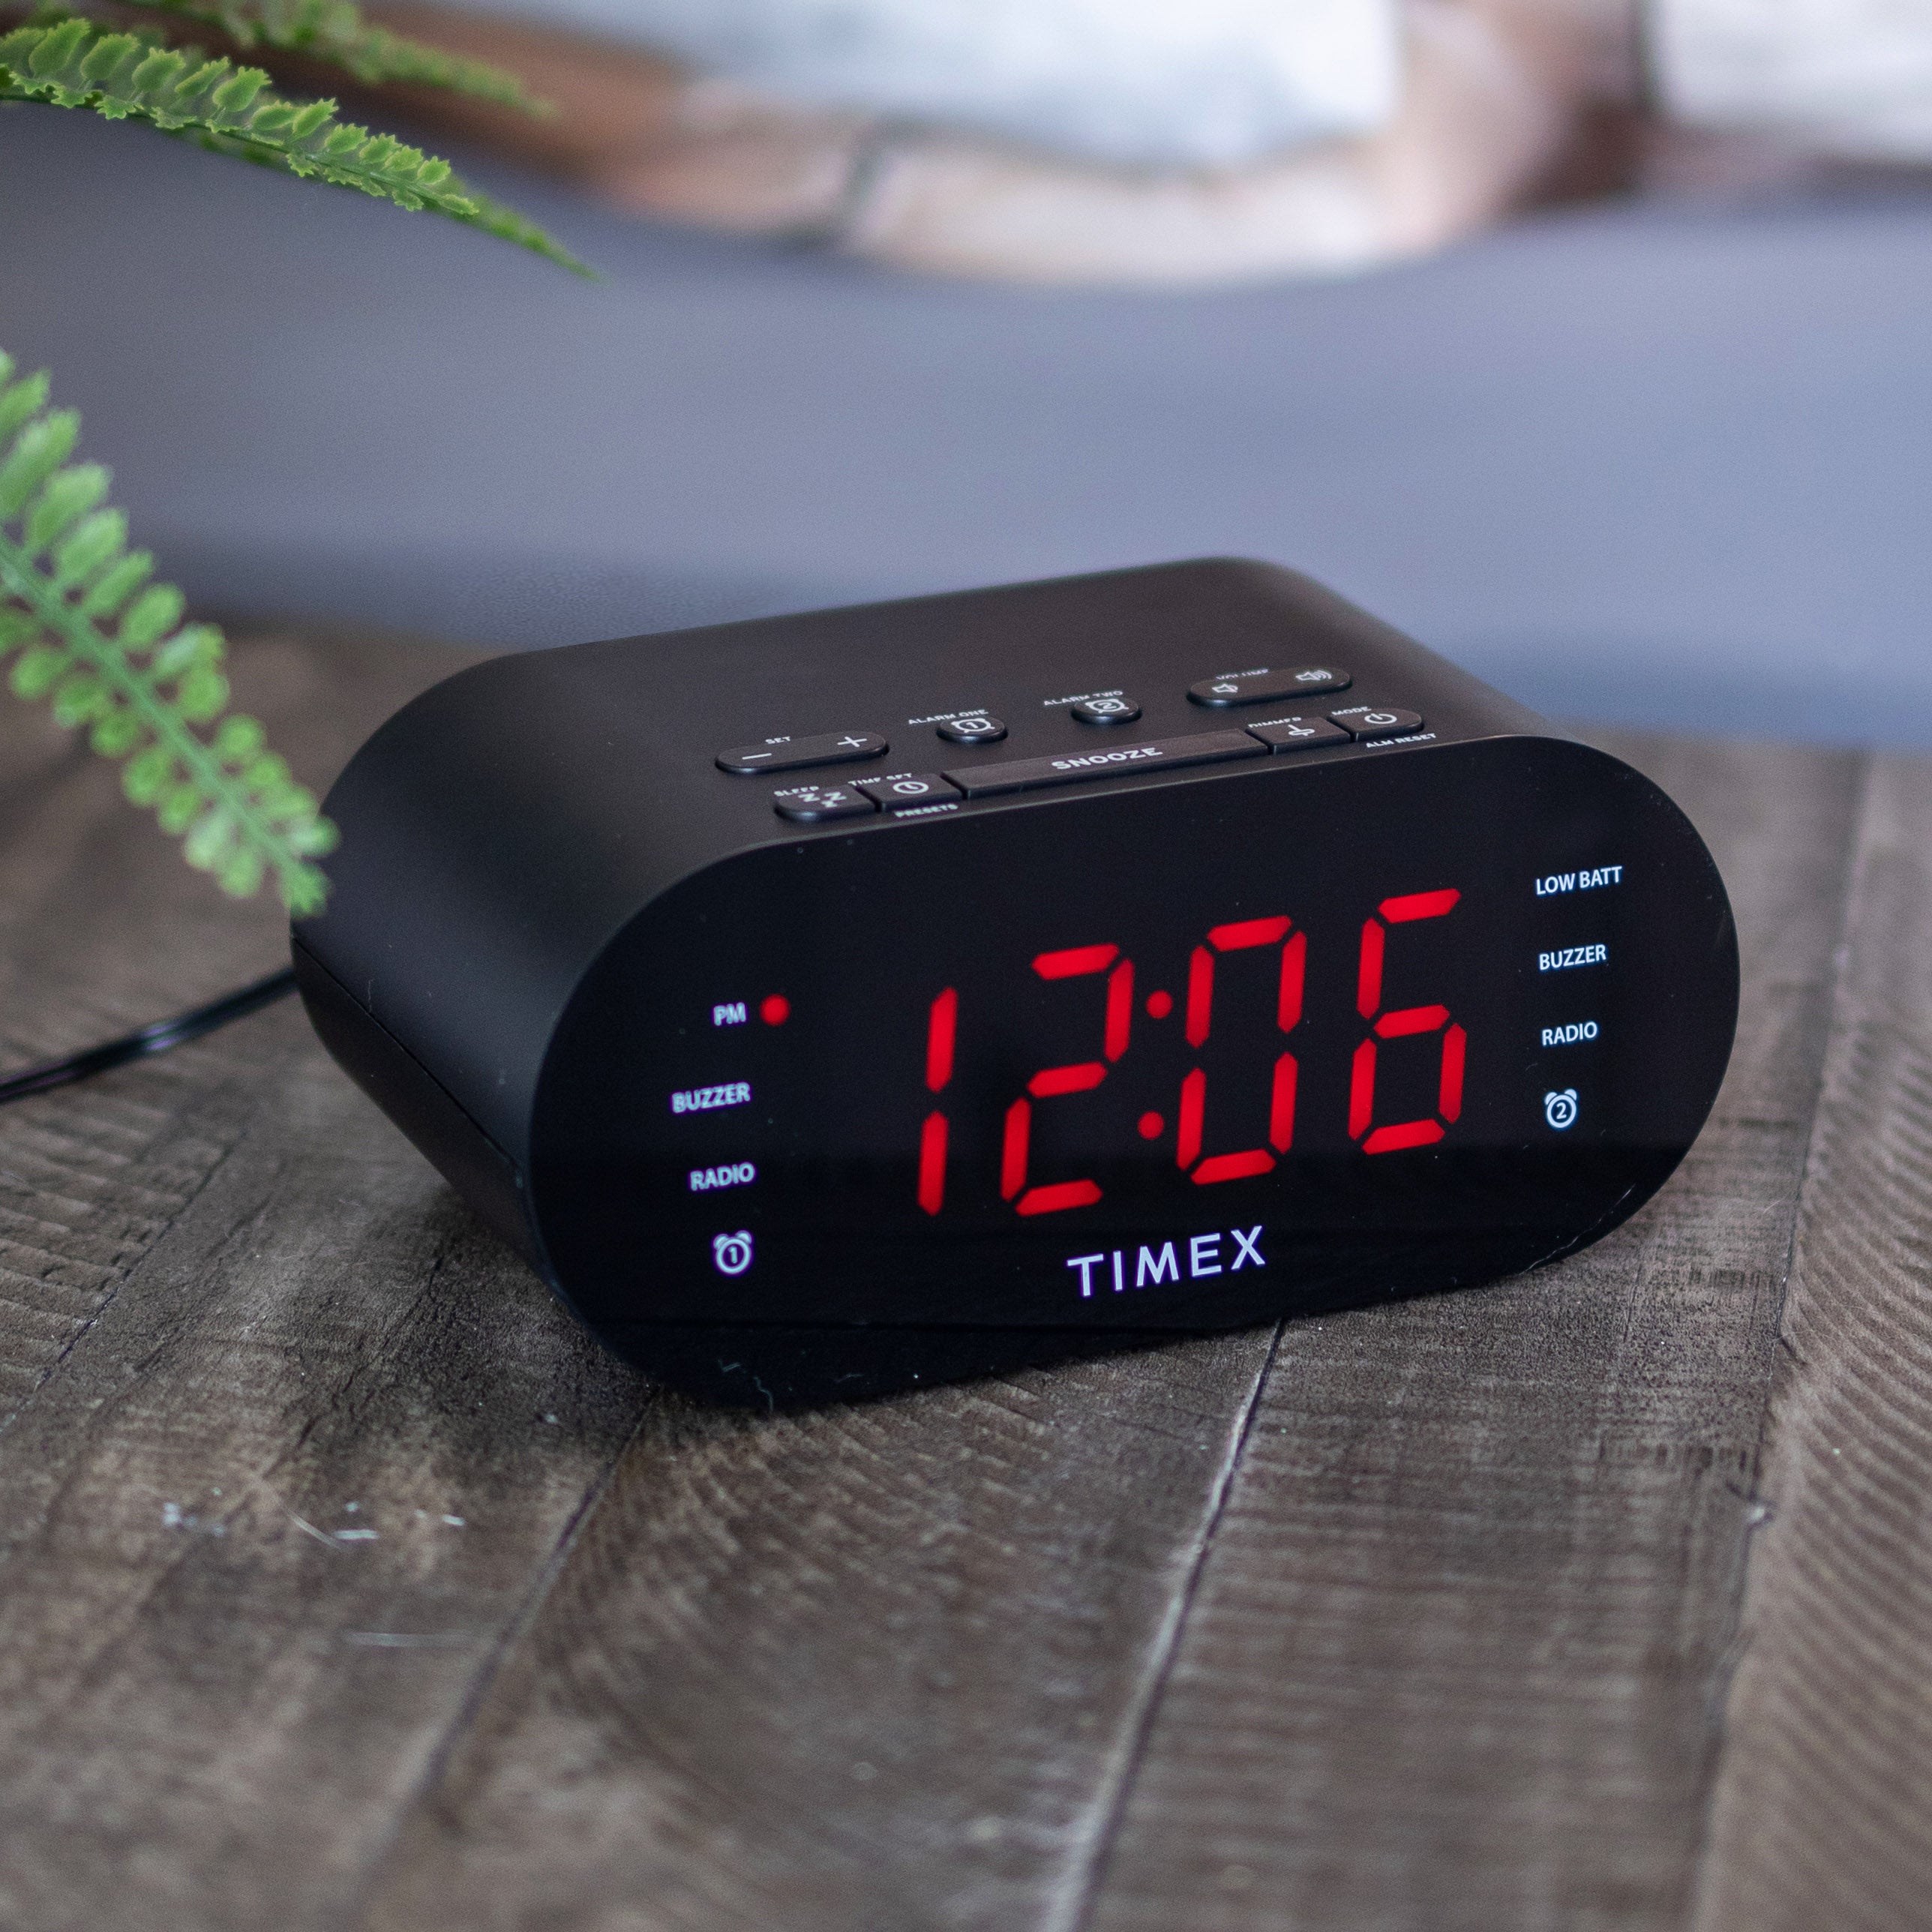 Timex Alarm Clock for Bedroom with AM/FM Radio and 20 Station Presets – Black (T231B)